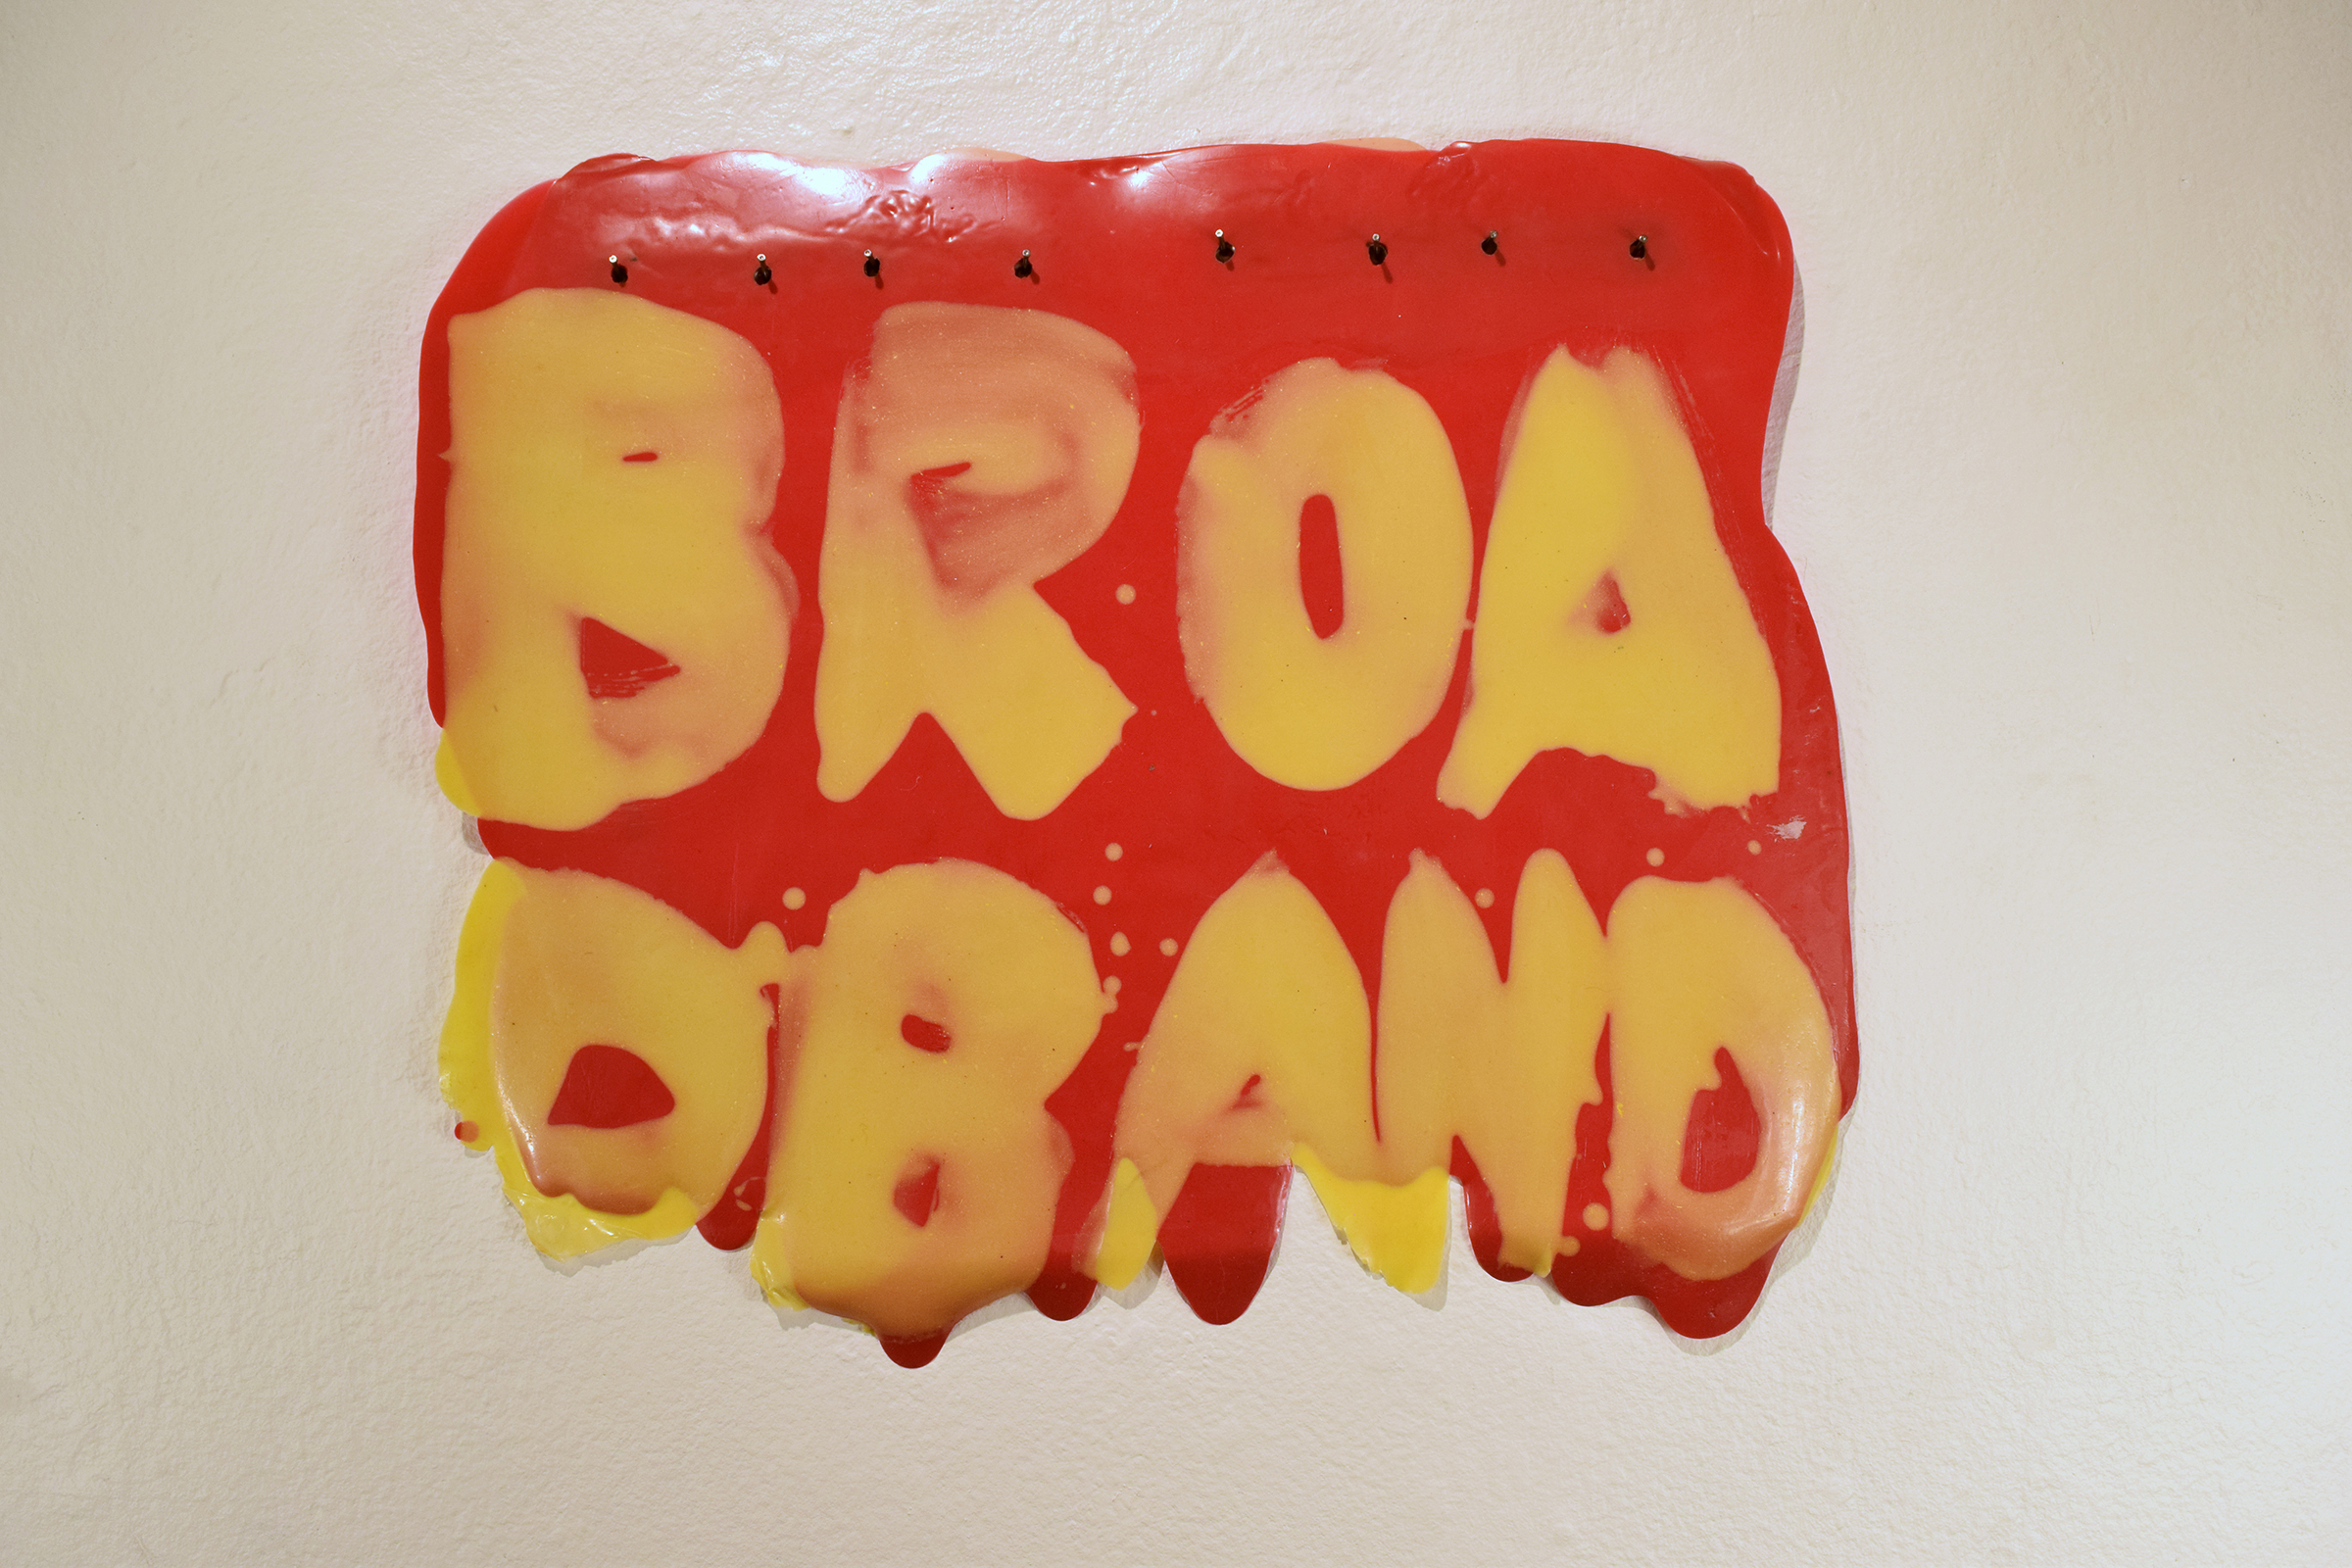 Words 'Broad Band' hung on a wall